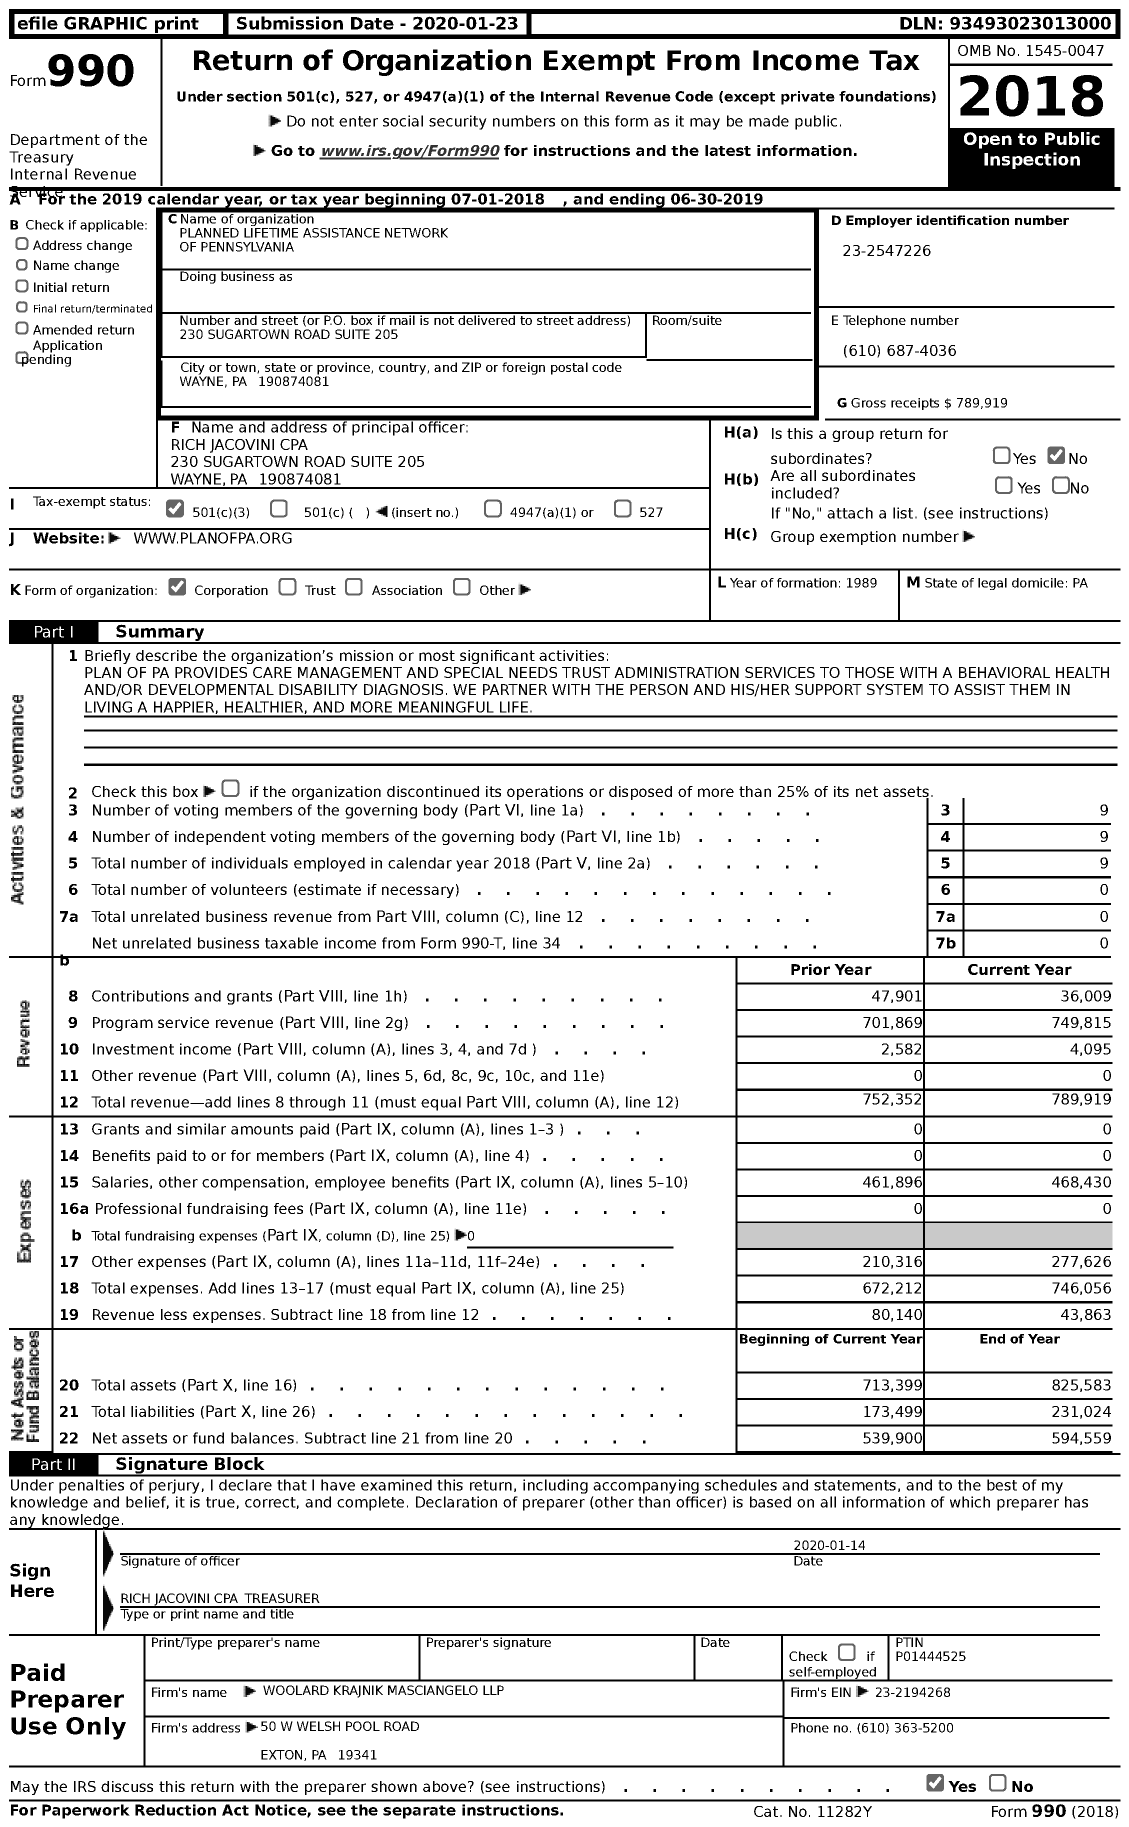 Image of first page of 2018 Form 990 for Planned Lifetime Assistance Network of Pennsylvania